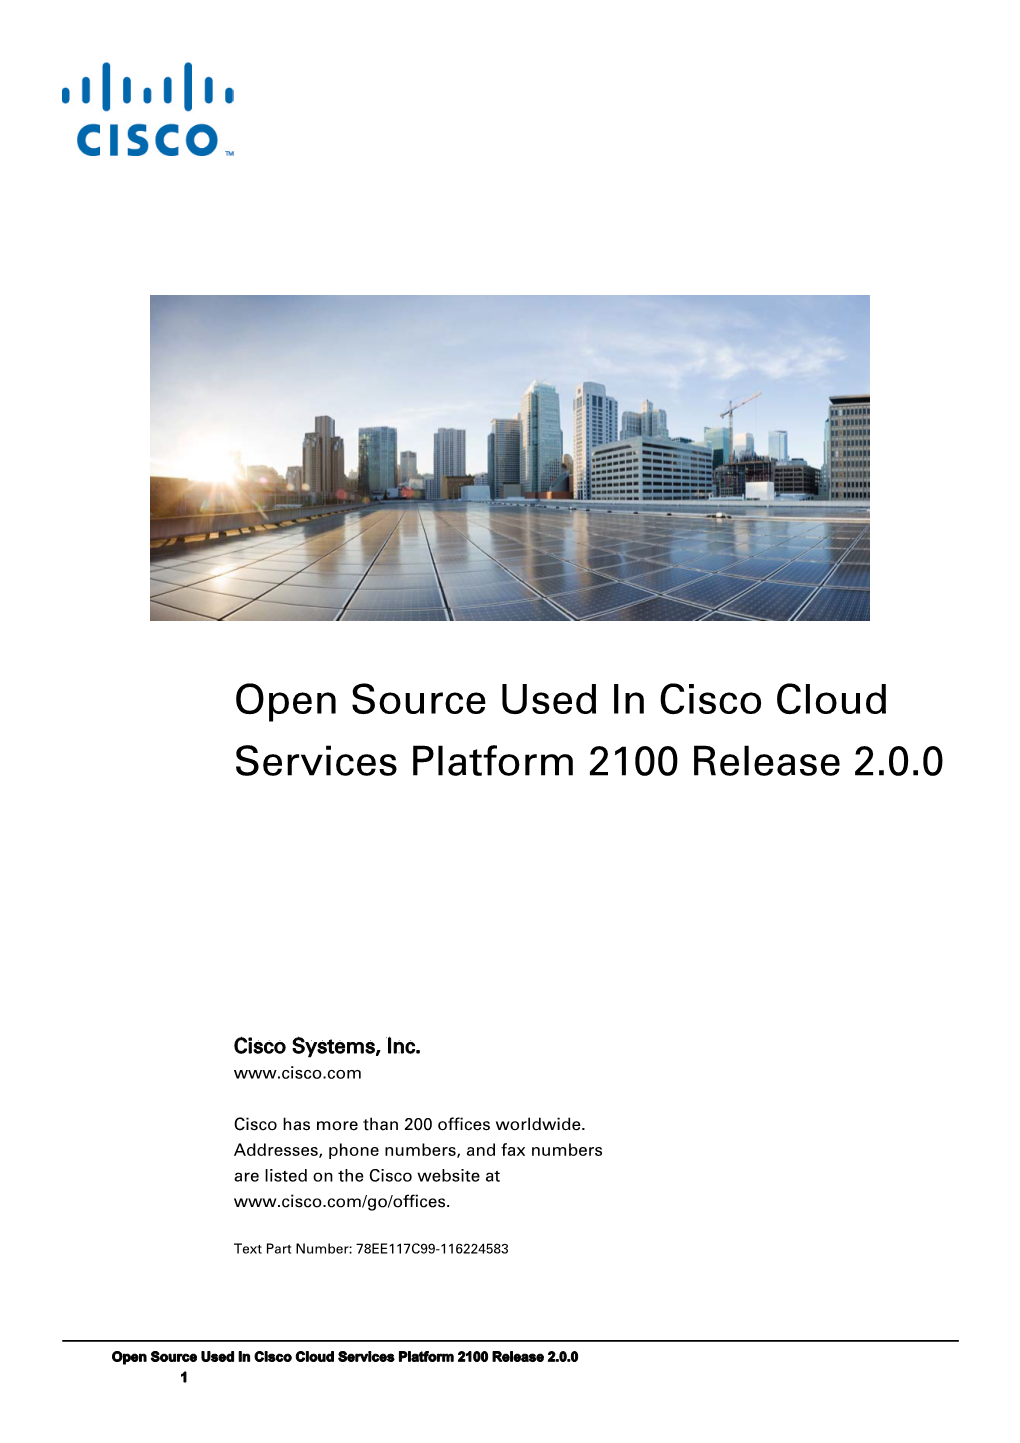 Open Source Used in Cisco Cloud Services Platform 2100, Release